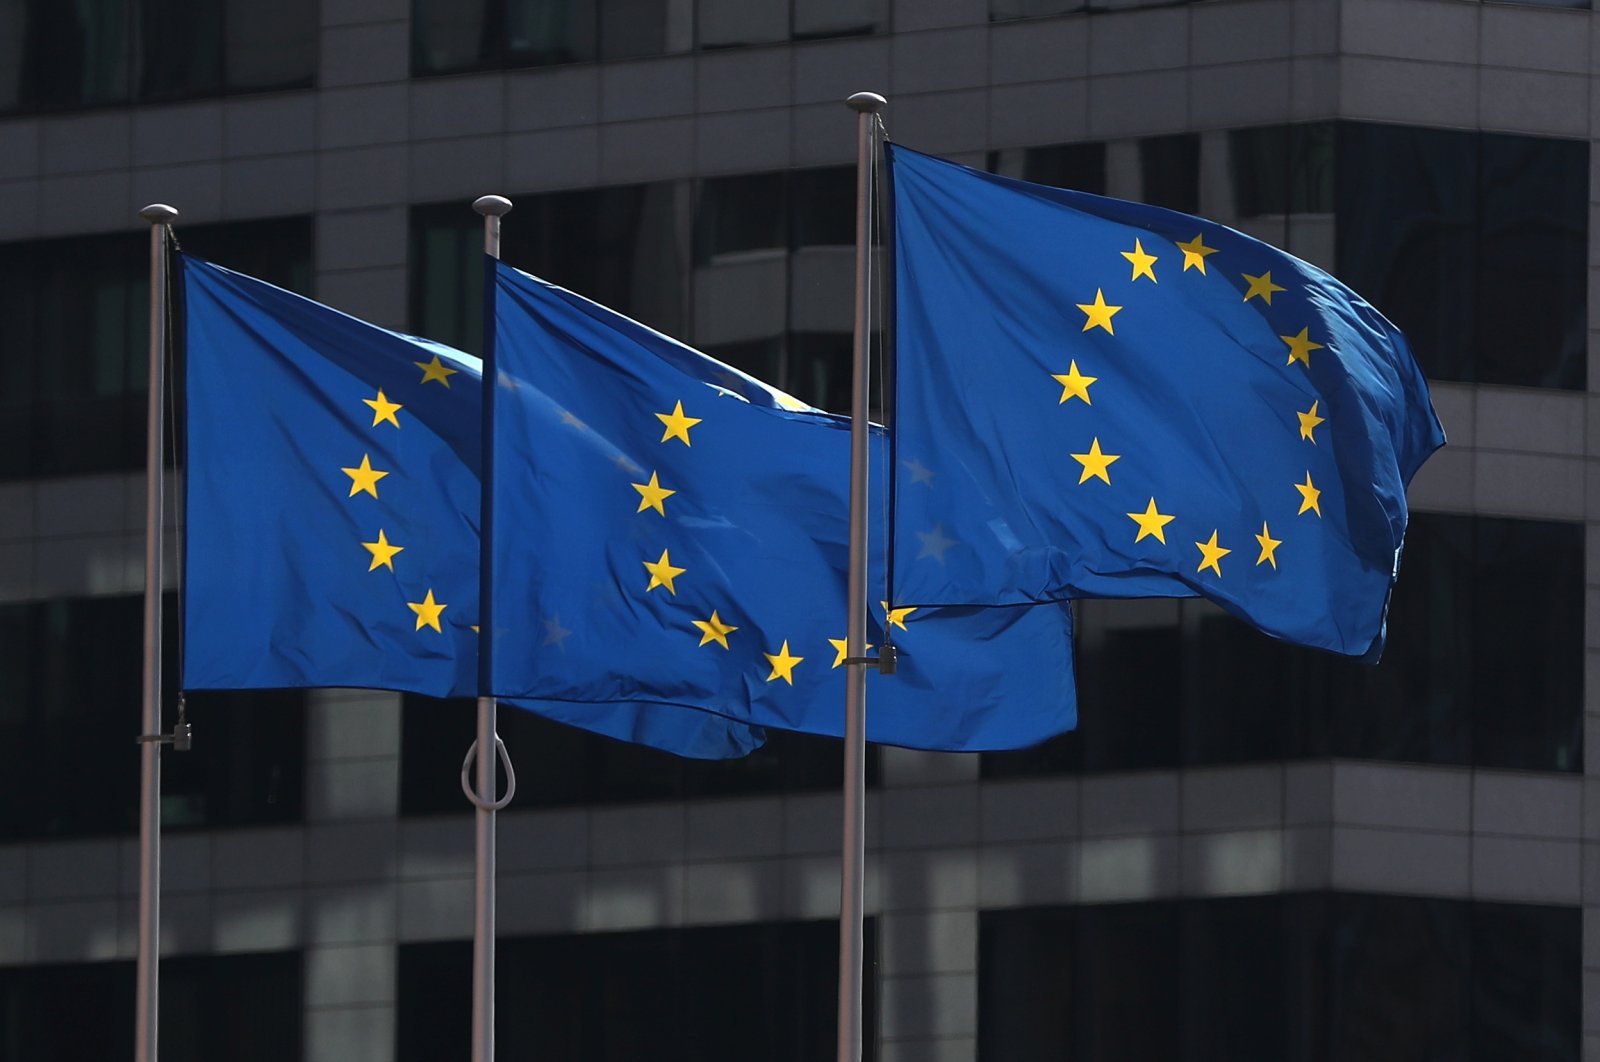 European Union flags fly outside the European Commission headquarters in Brussels, Belgium, April 10, 2019. (Reuters Photo)